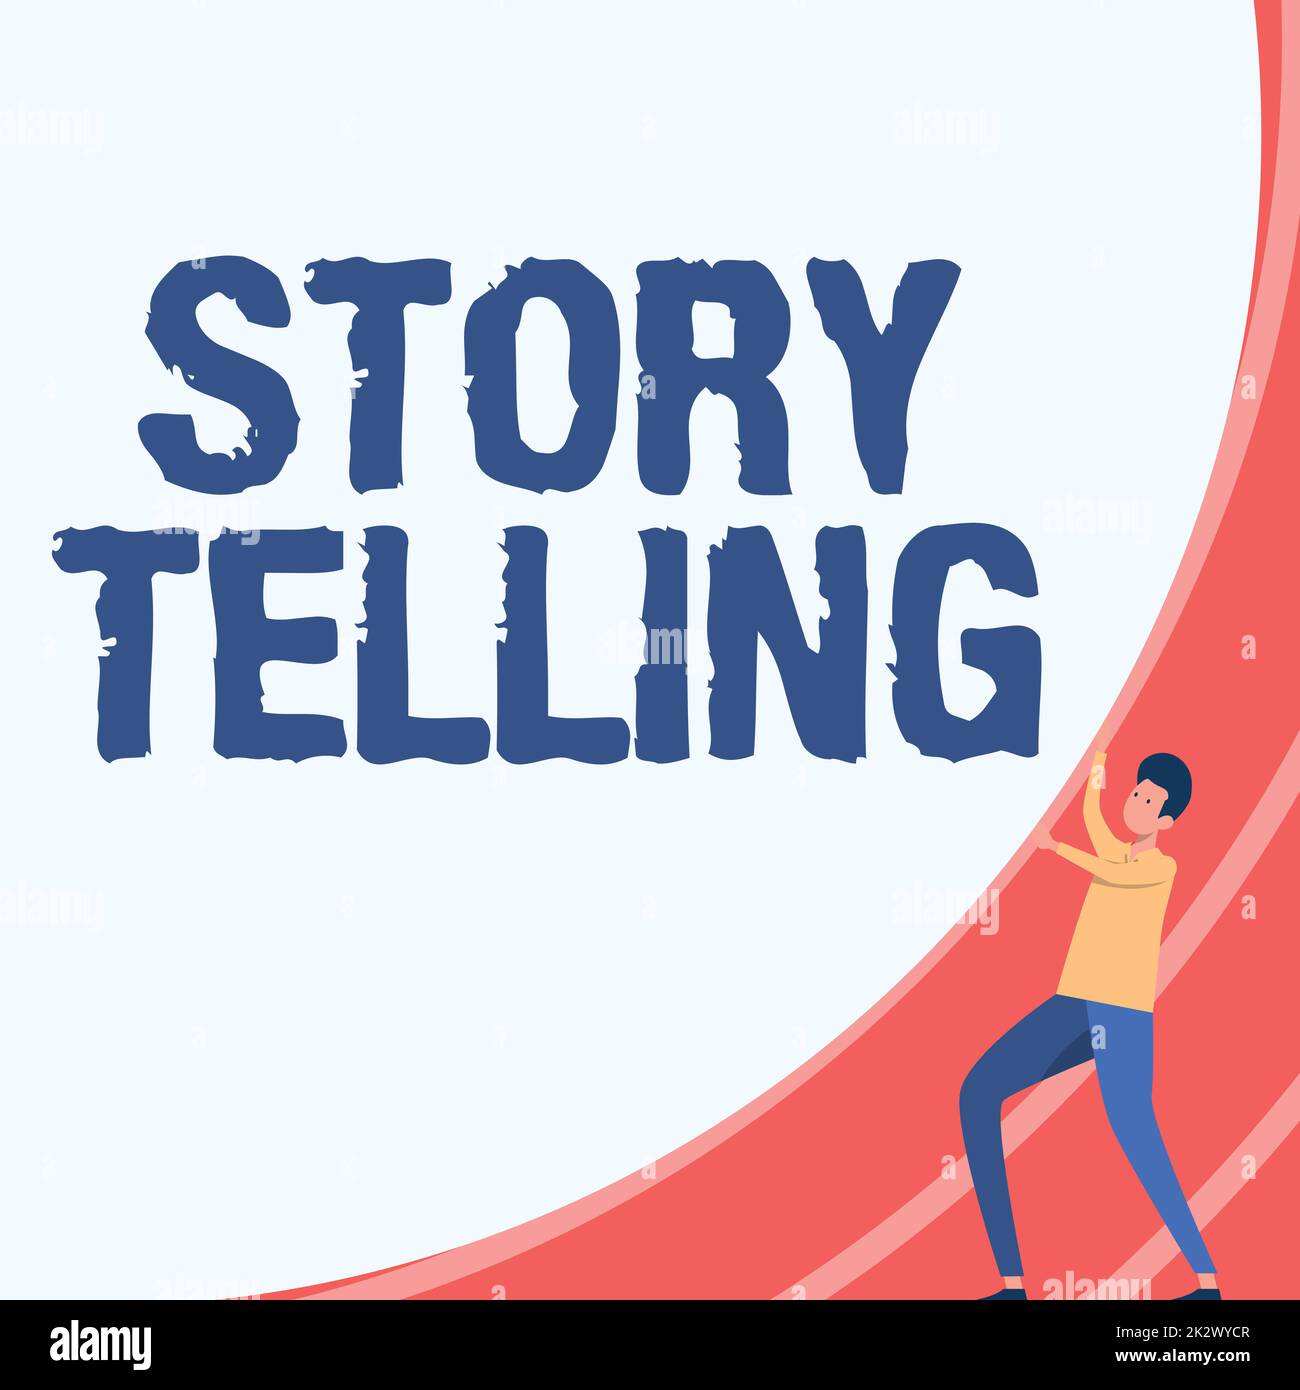 Text caption presenting Story Telling. Internet Concept social and cultural Activity with Theatrical Gestures Gentleman Drawing Standing Pushing Big Circular Object. Stock Photo